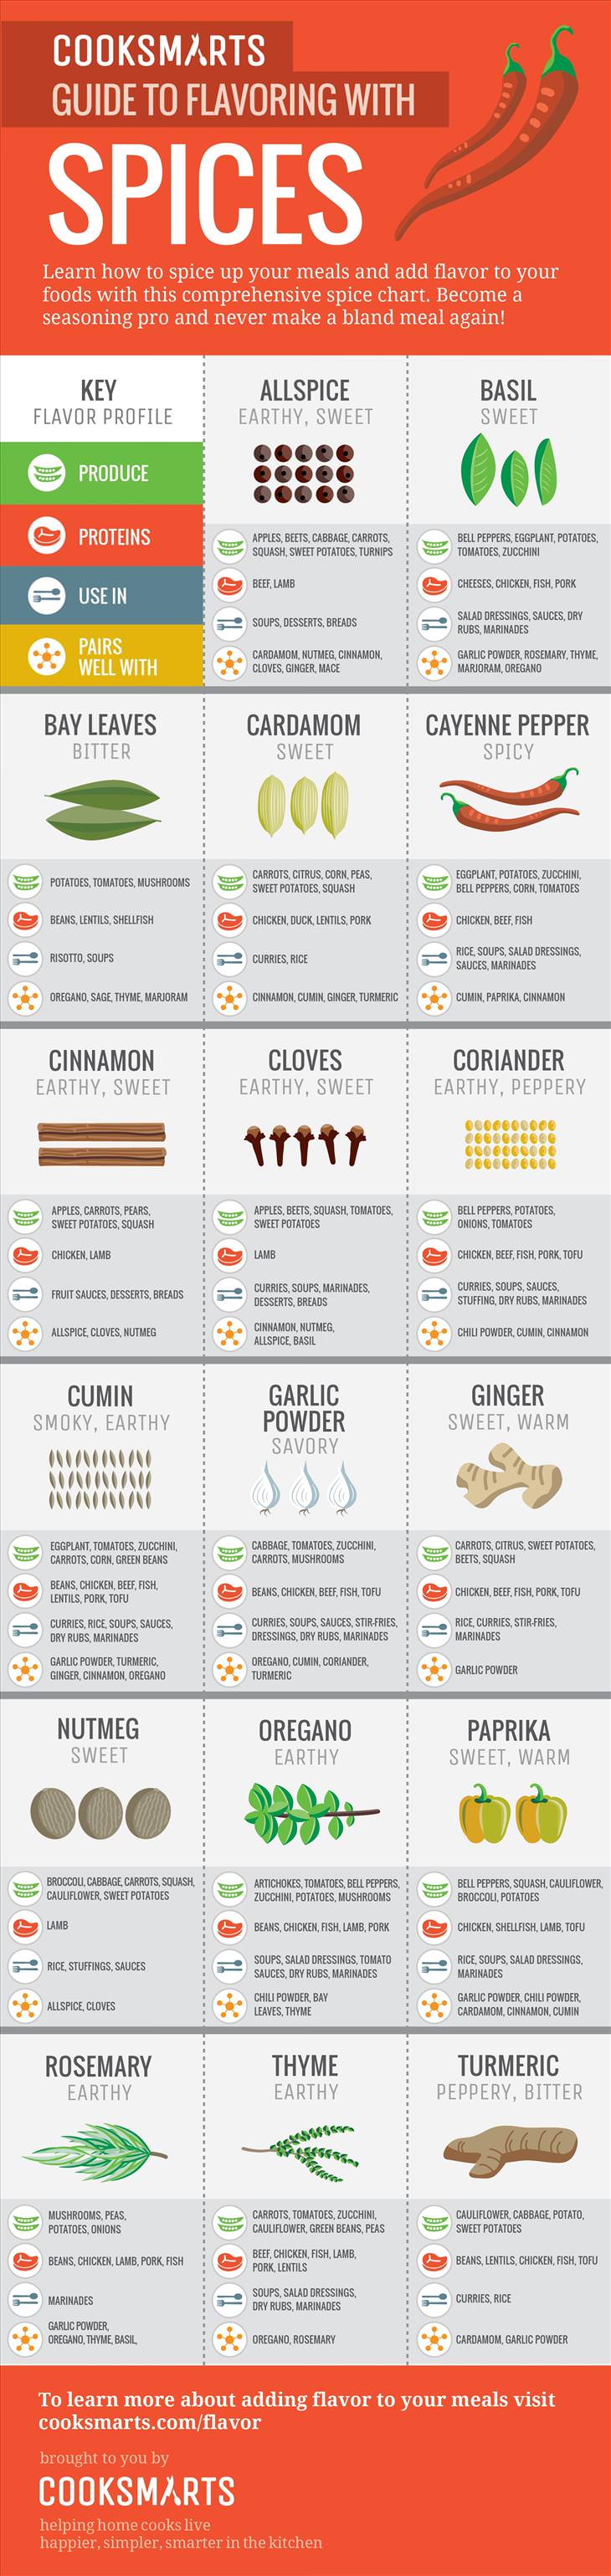 spices-cuisines